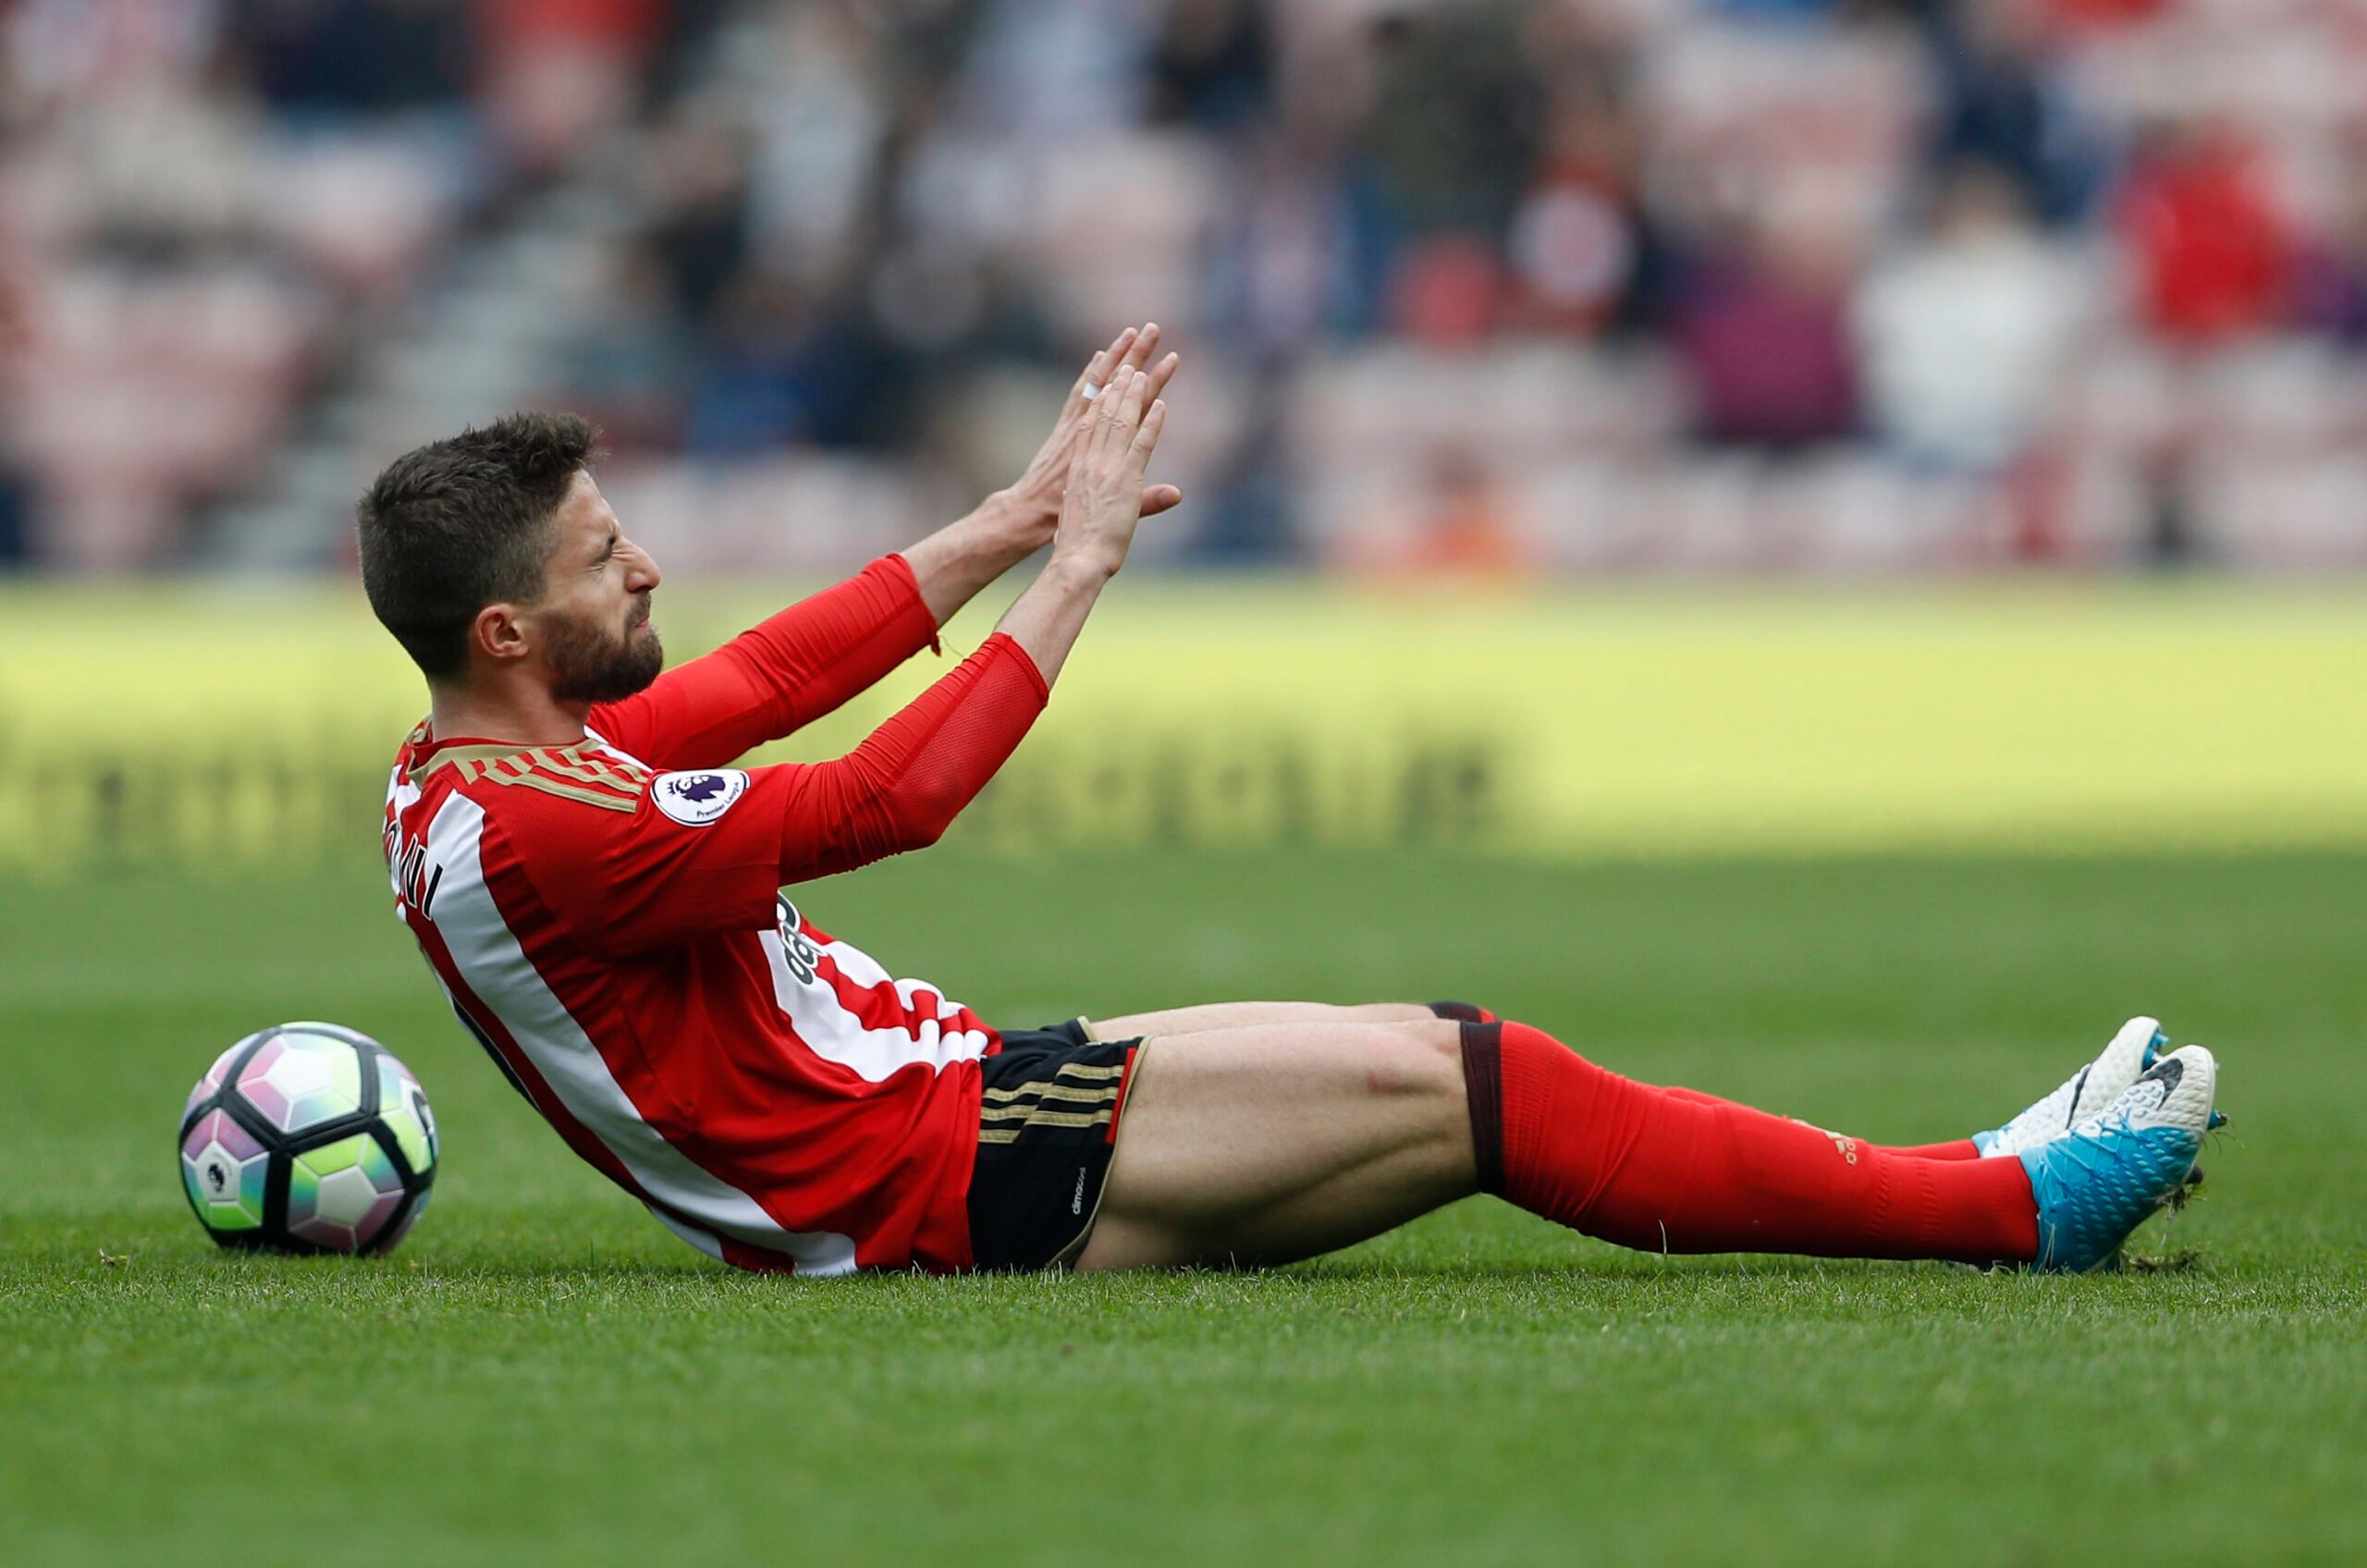 Britain Football Soccer - Sunderland v AFC Bournemouth - Premier League - Stadium of Light - 29/4/17 Sunderland's Fabio Borini gestures  Action Images via Reuters / Lee Smith Livepic EDITORIAL USE ONLY. No use with unauthorized audio, video, data, fixture lists, club/league logos or 